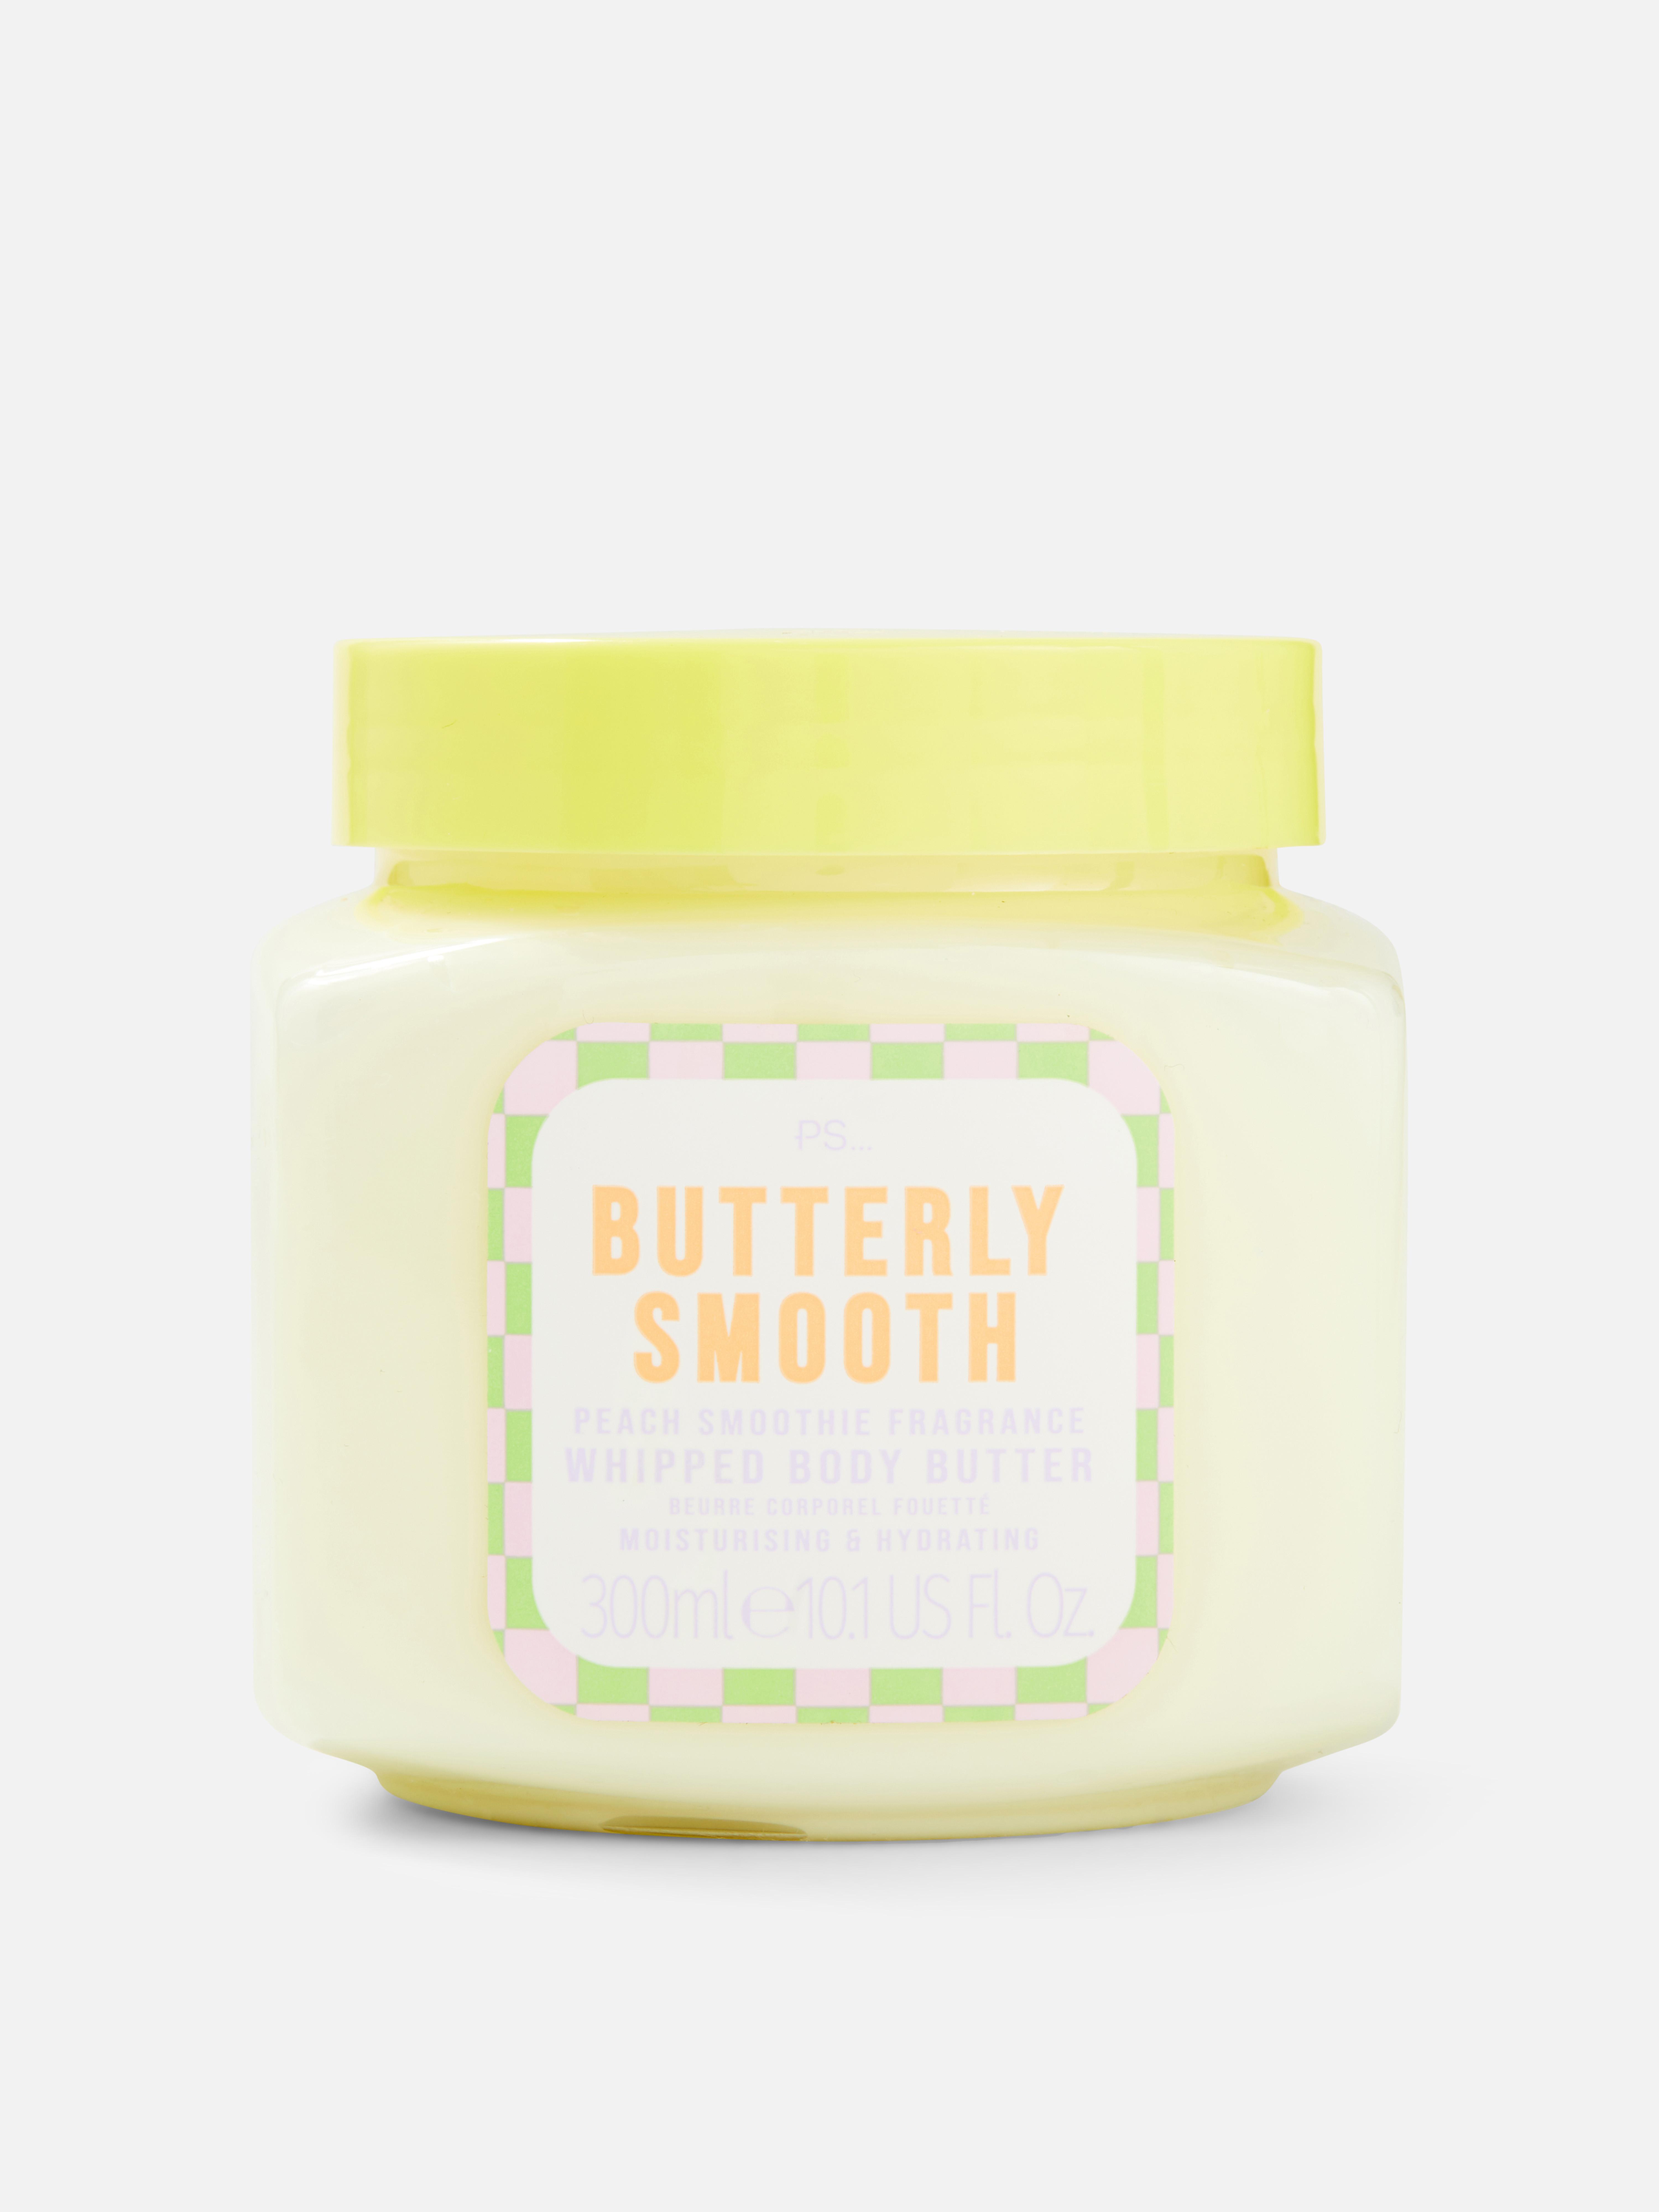 PS... Peach Smoothie Whipped Body Butter